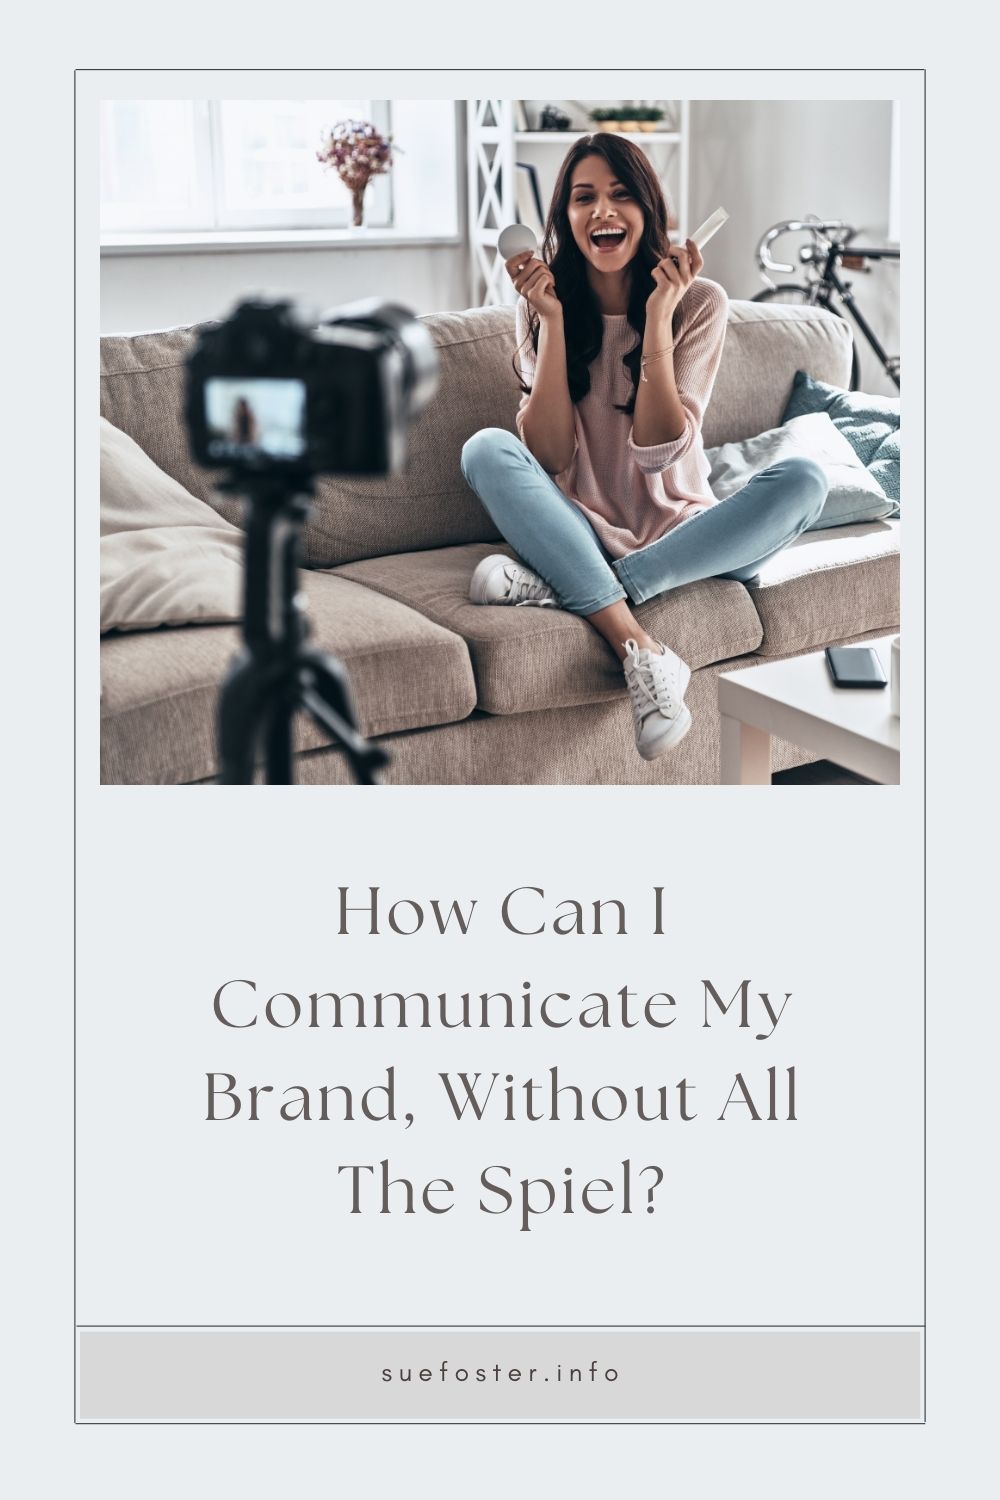 How Can I Communicate My Brand, Without All The Spiel?